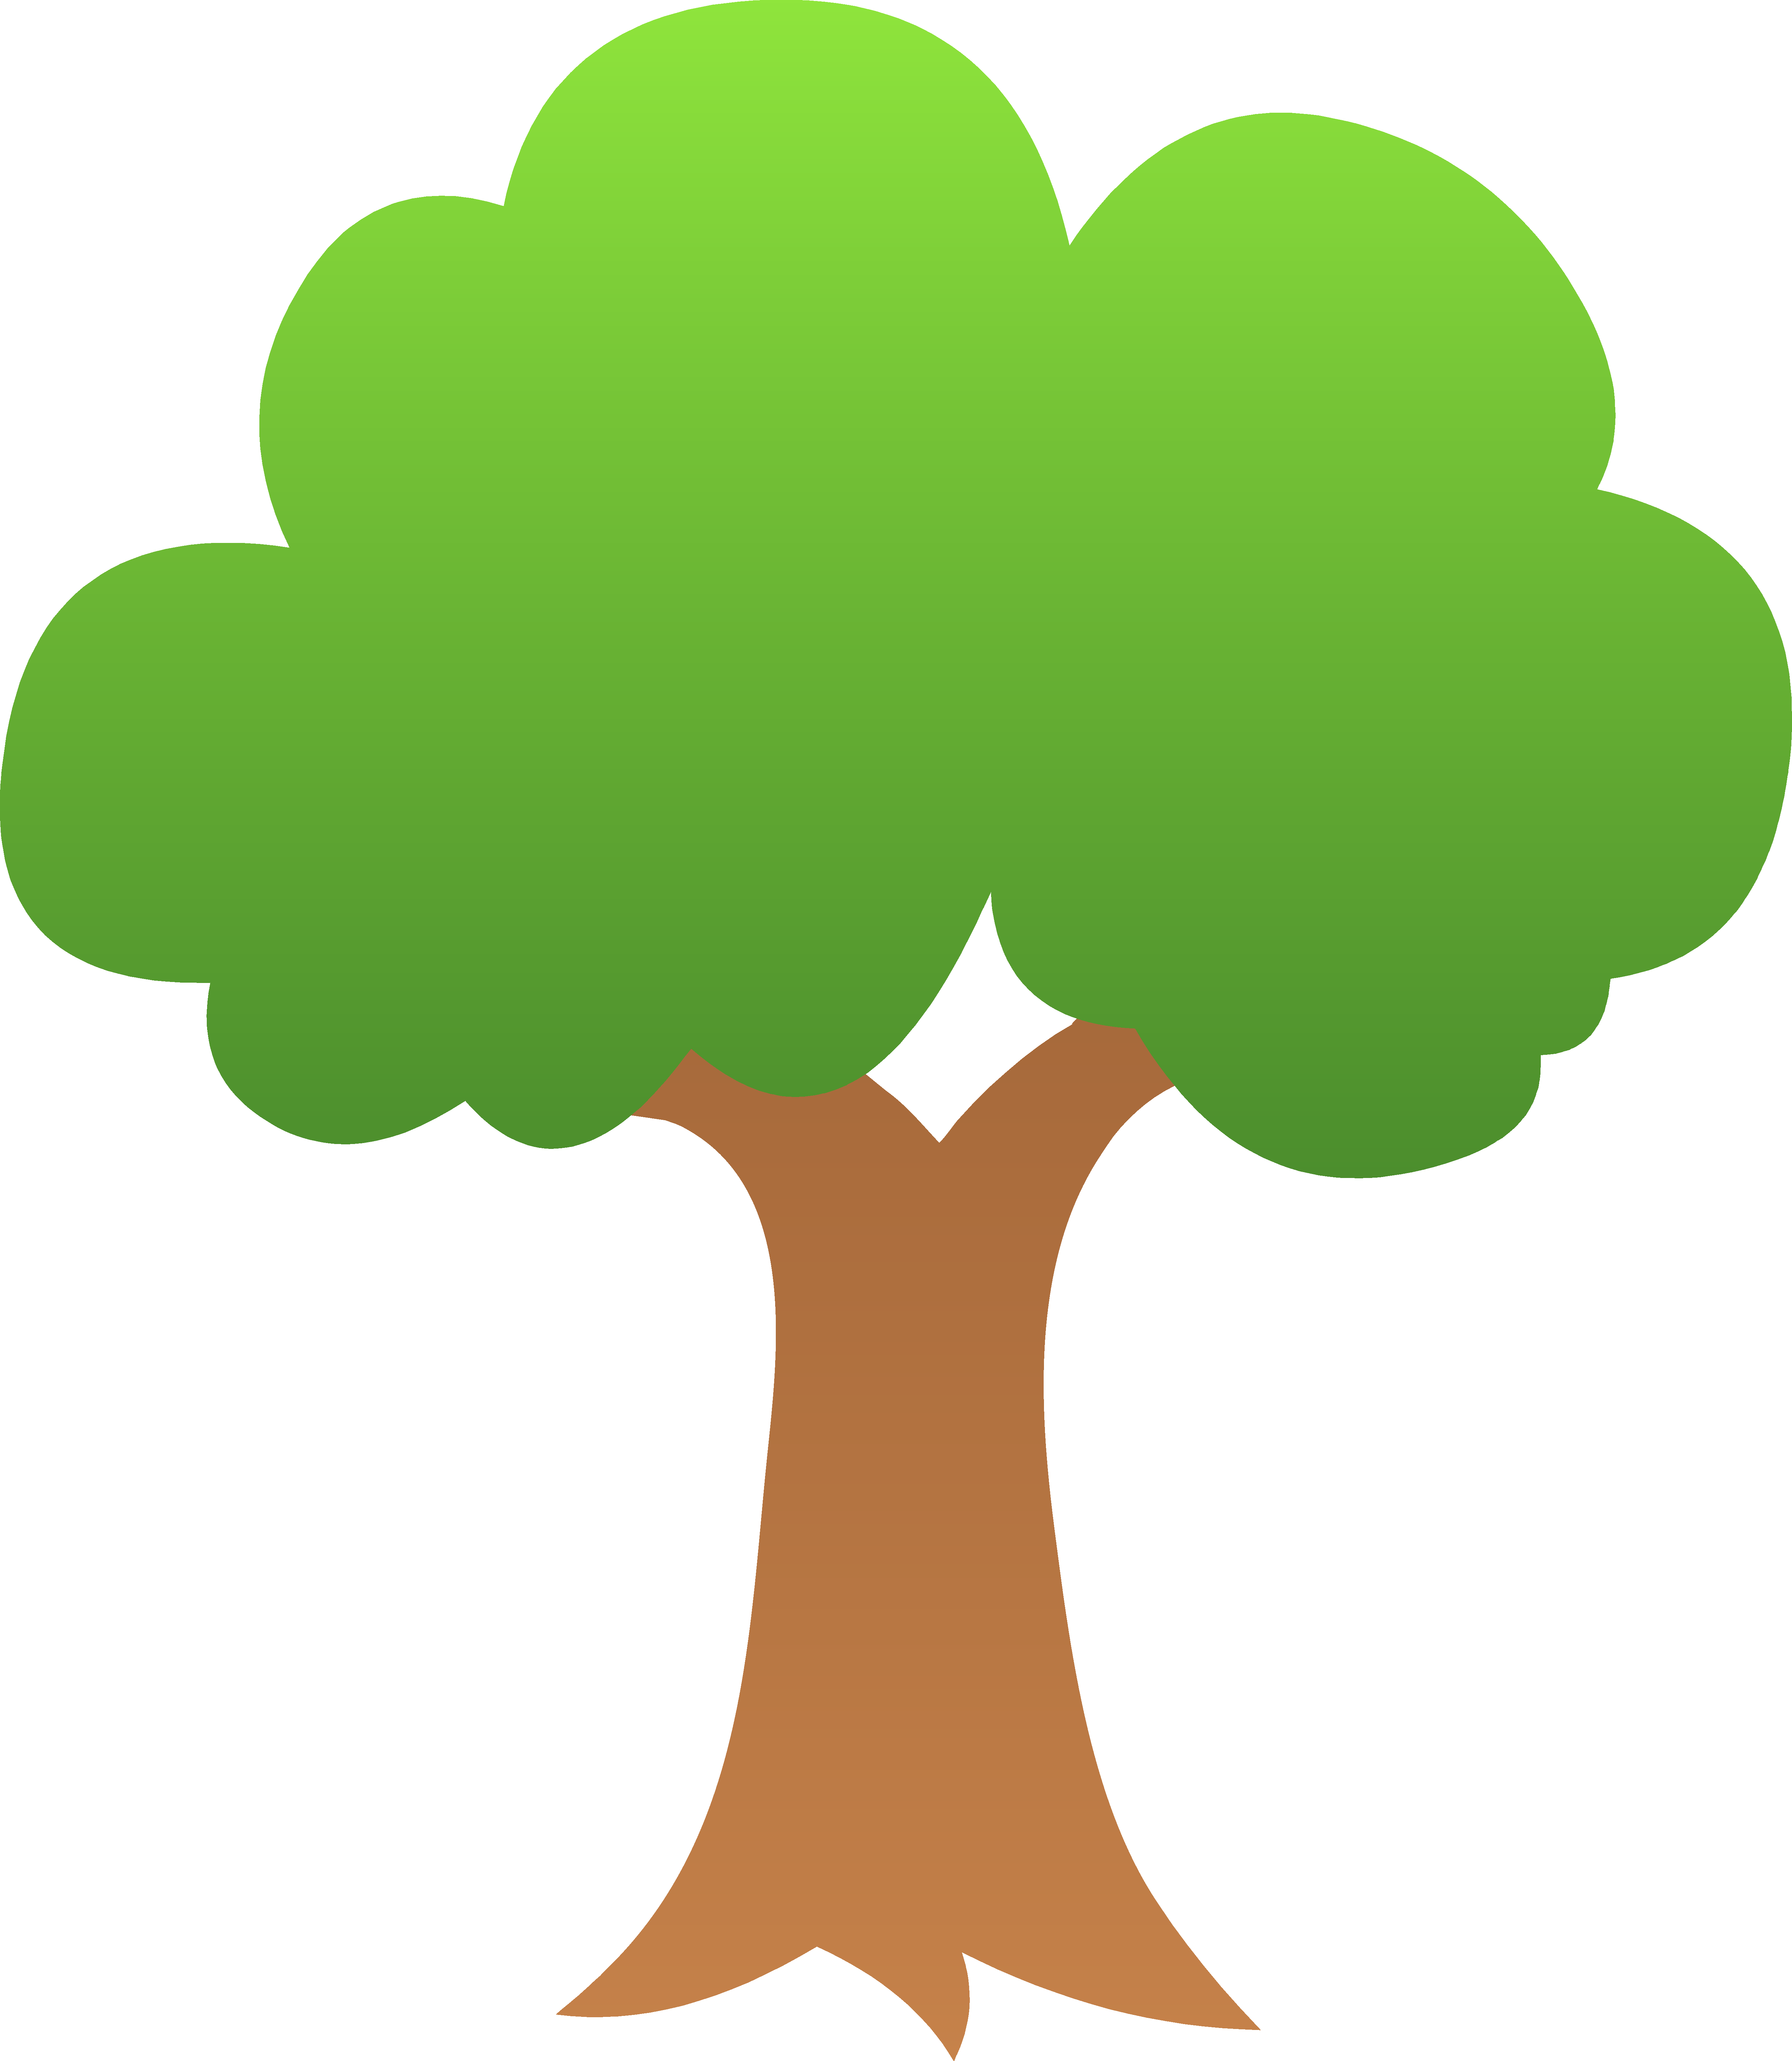 tree clipart - Clipart Of Trees